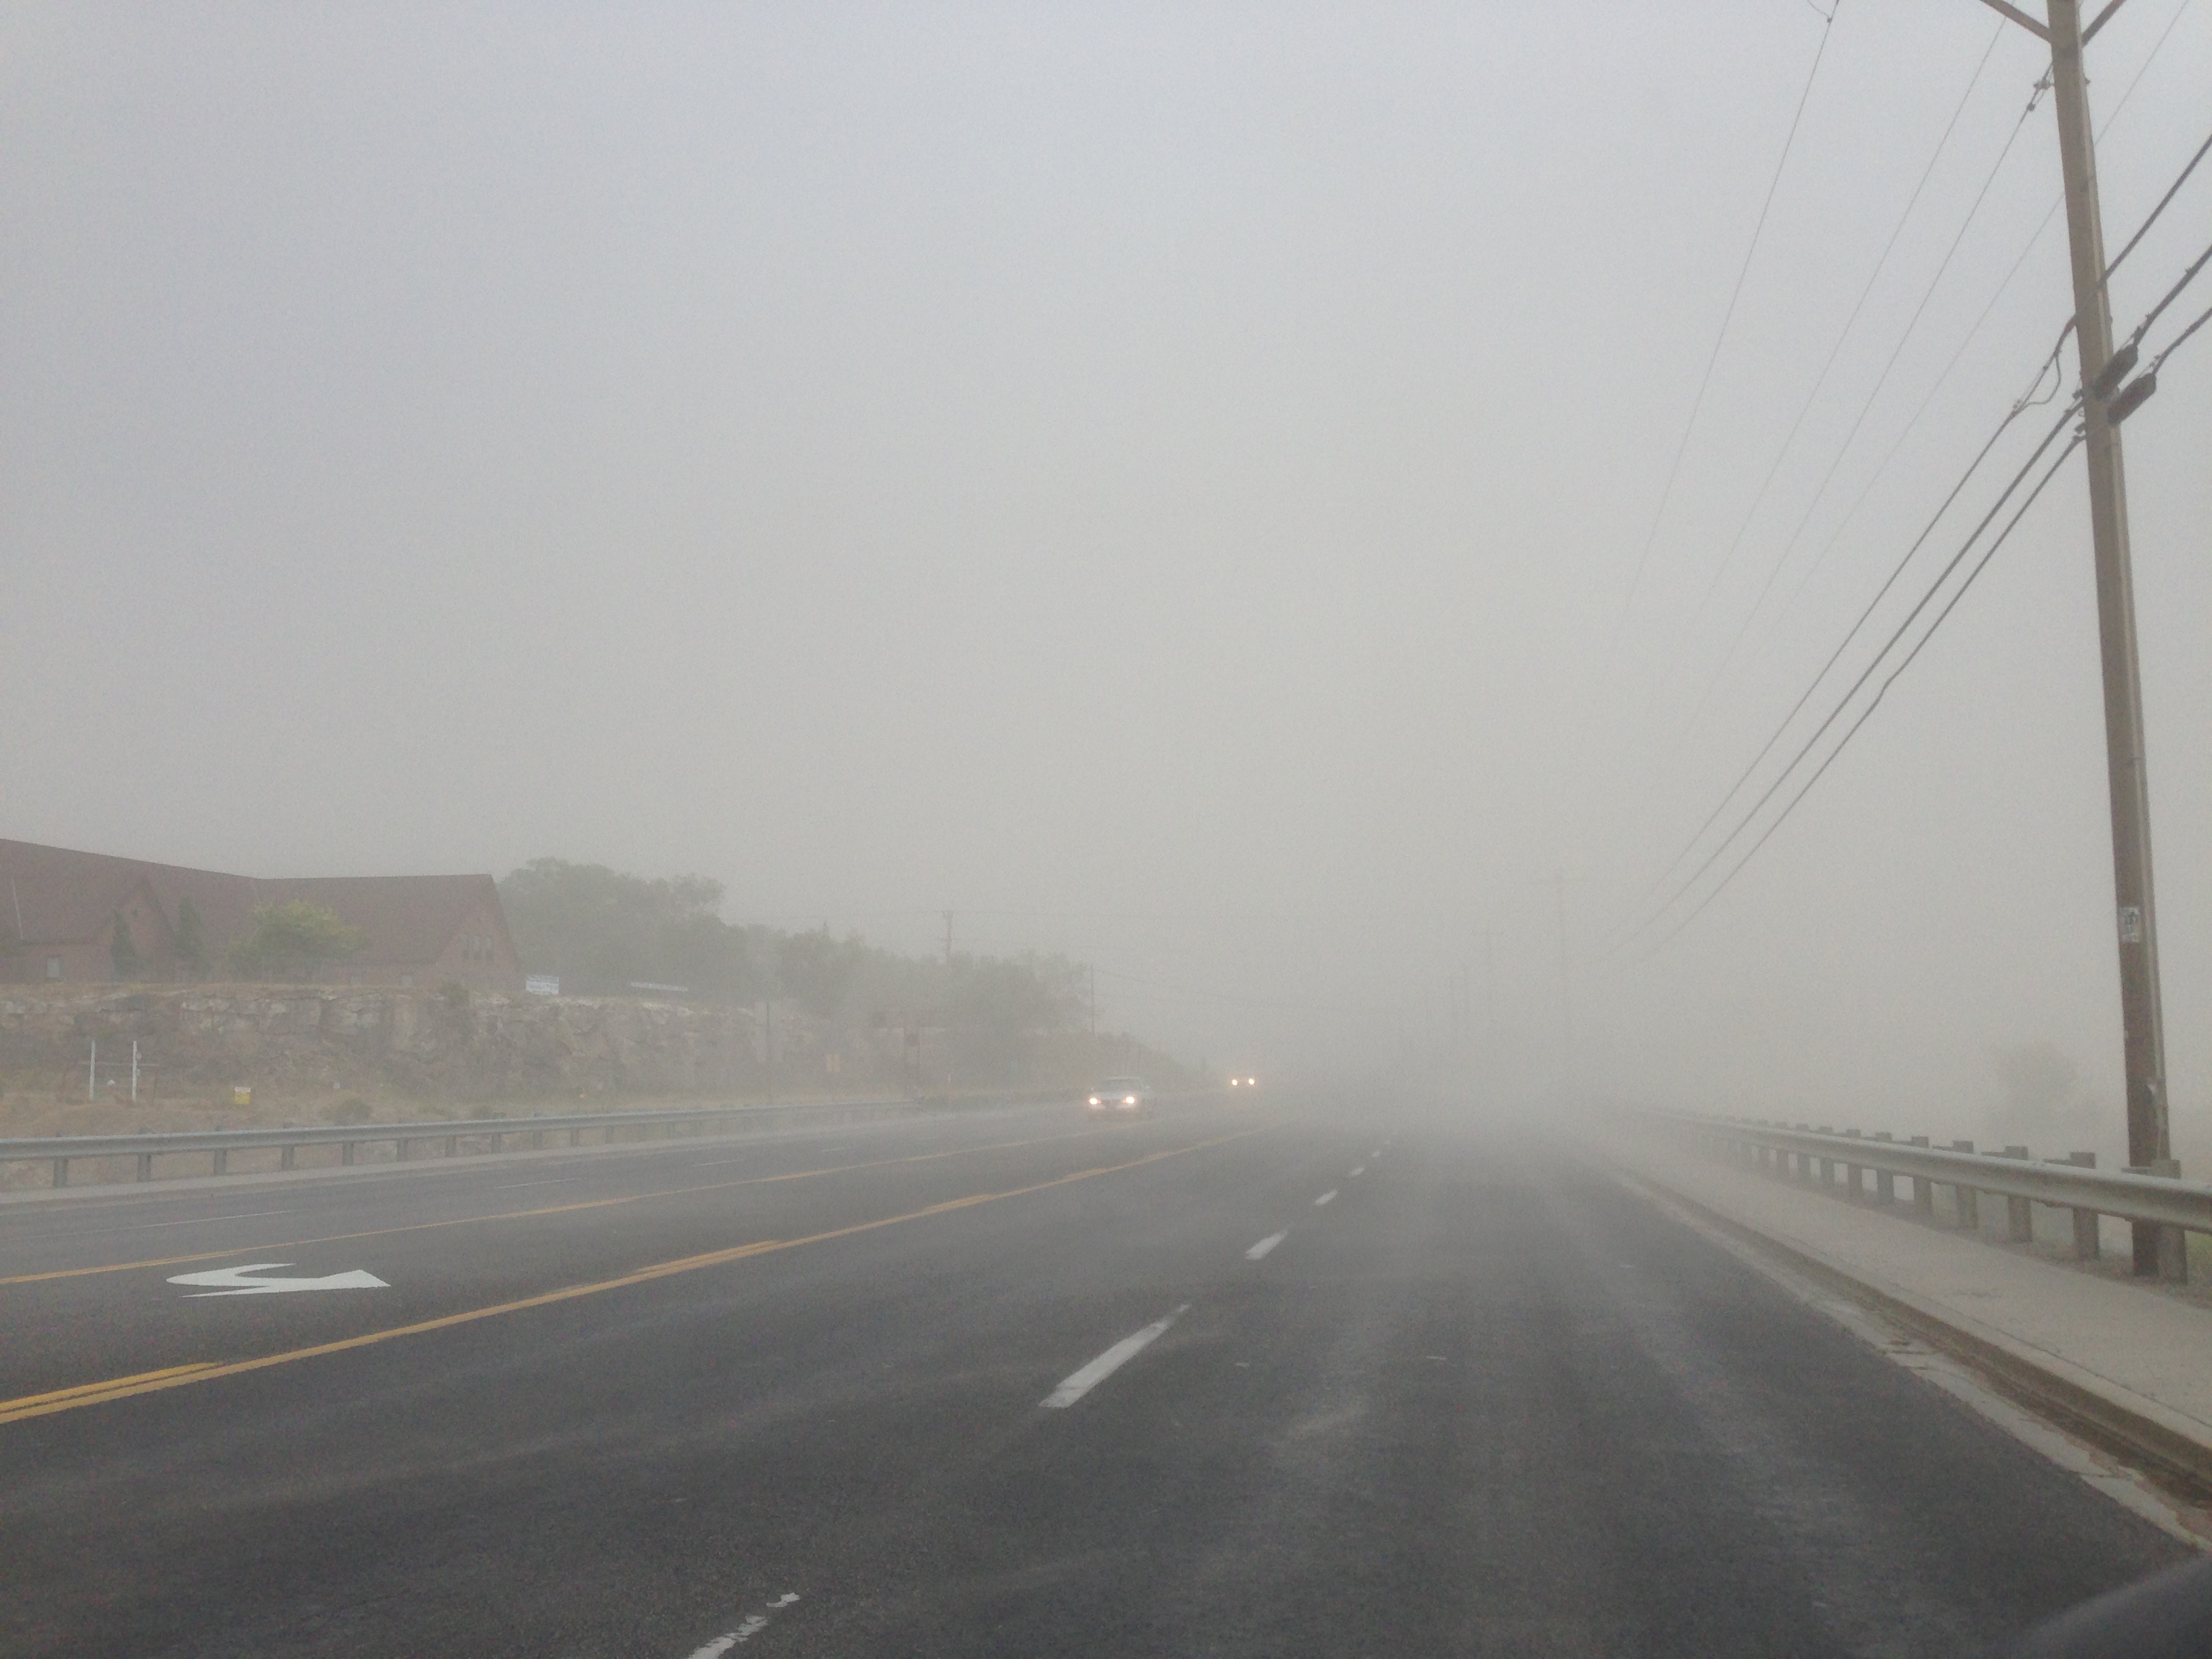 a photo showing reduces visibility